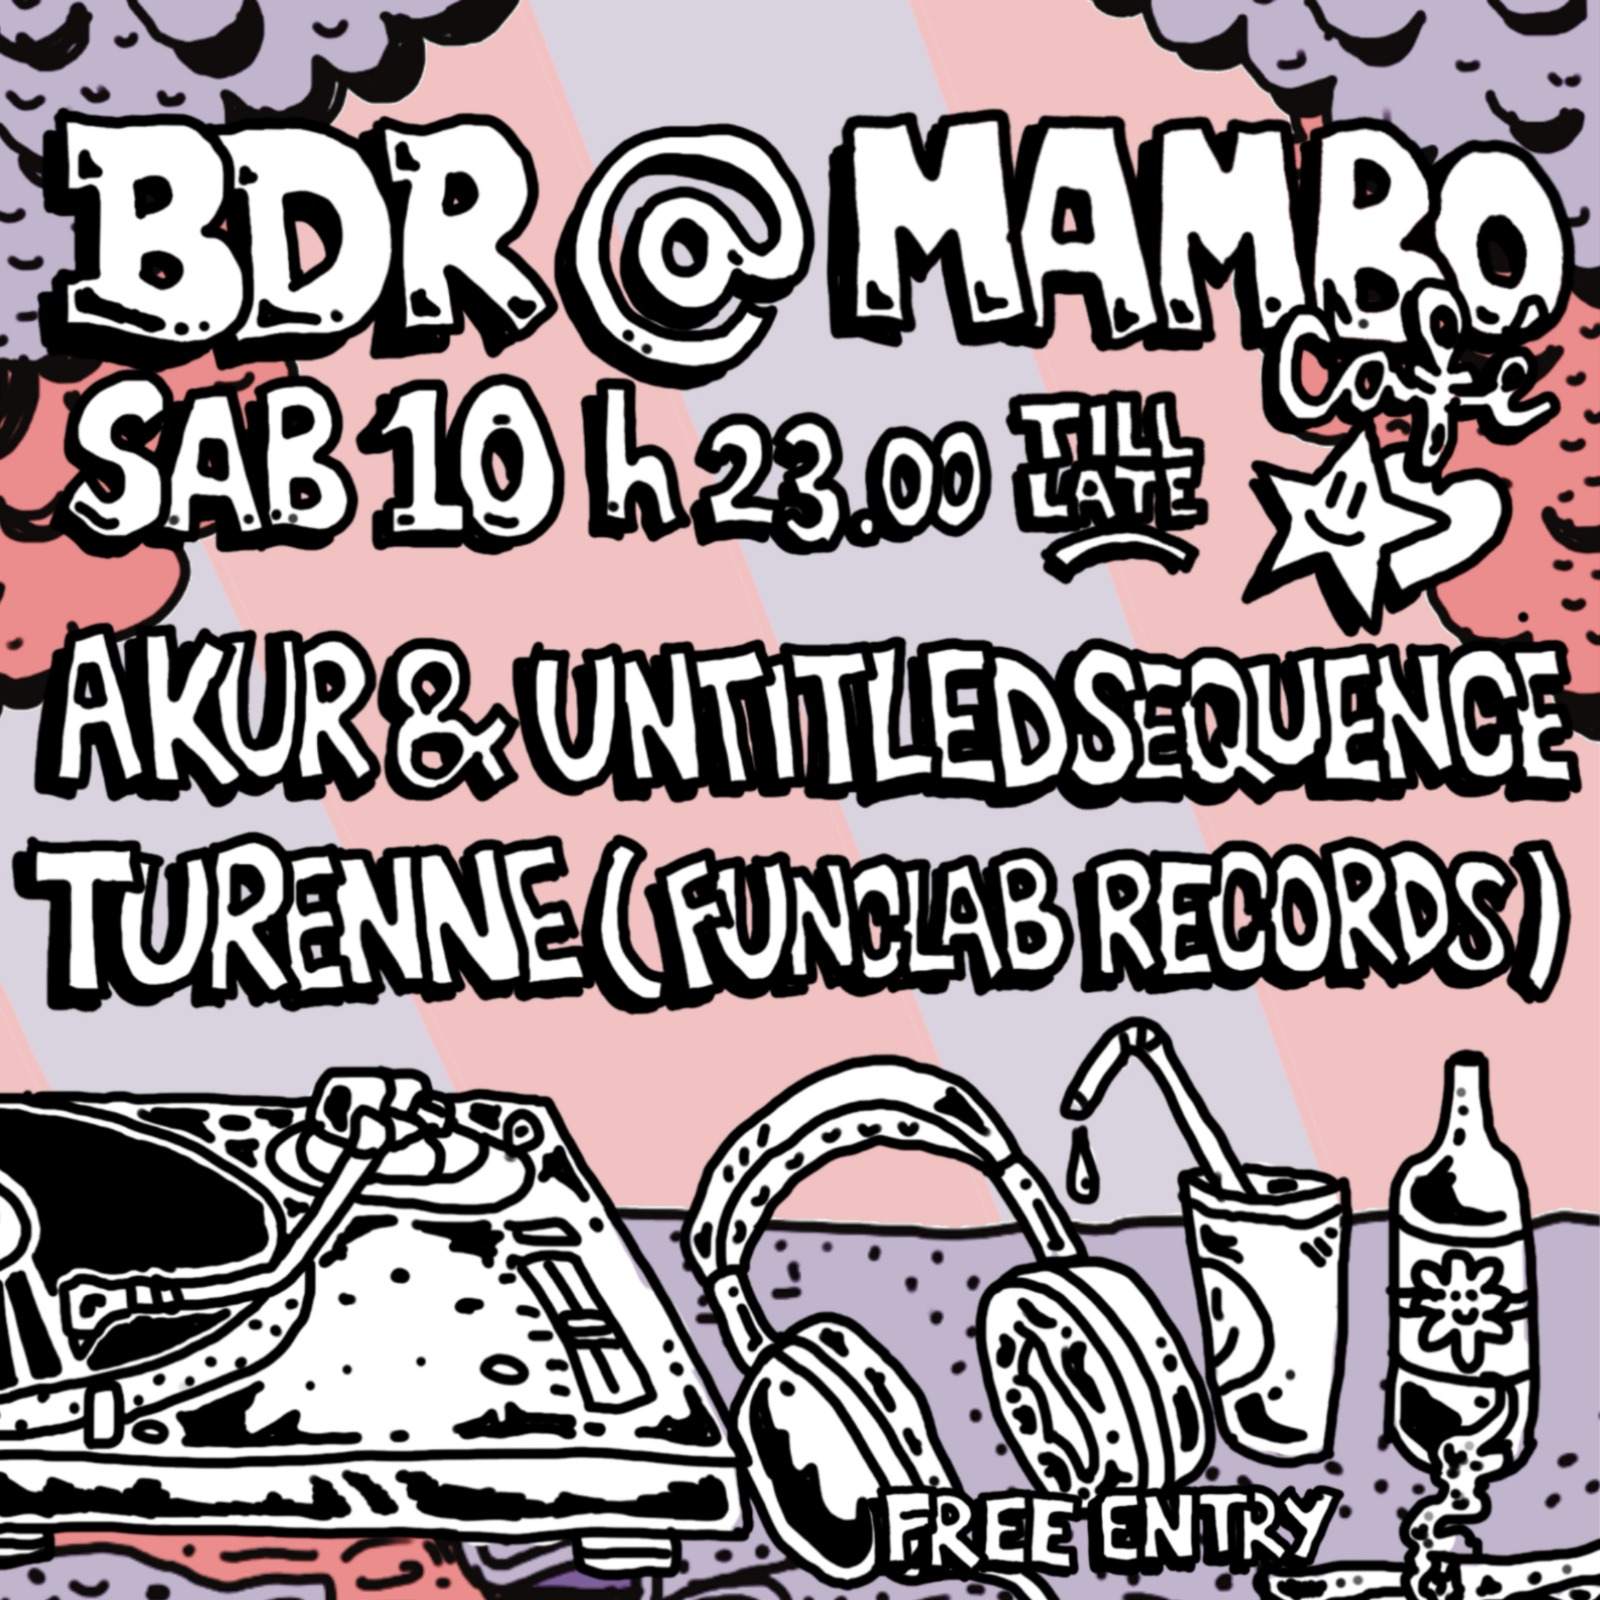 BDR at Mambo with Turenne, Akur, Untitledsequence - Página frontal